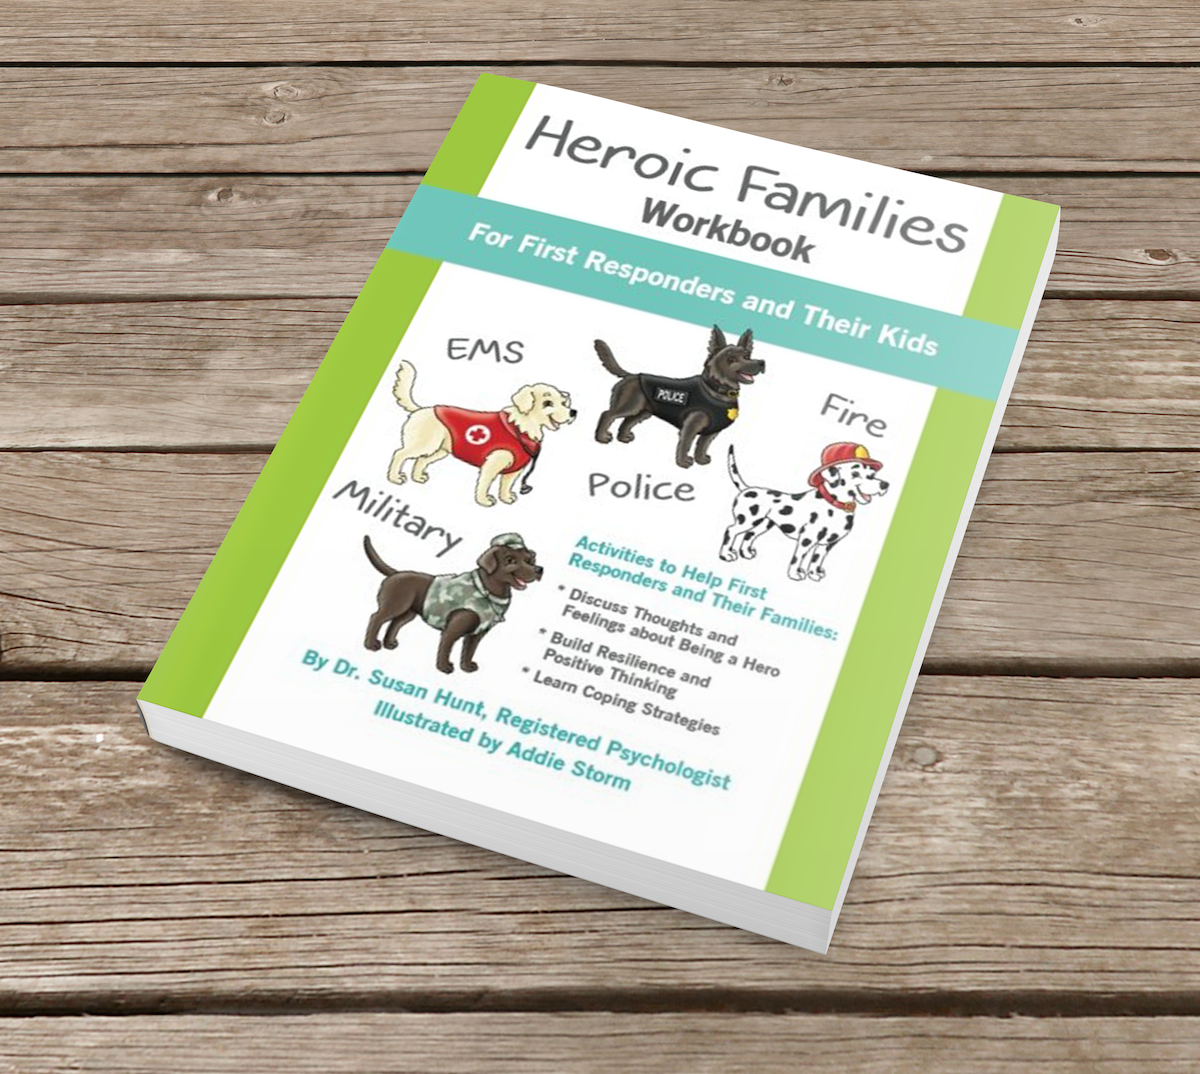 Heroic Families Workbook: For First Responders and Their Families